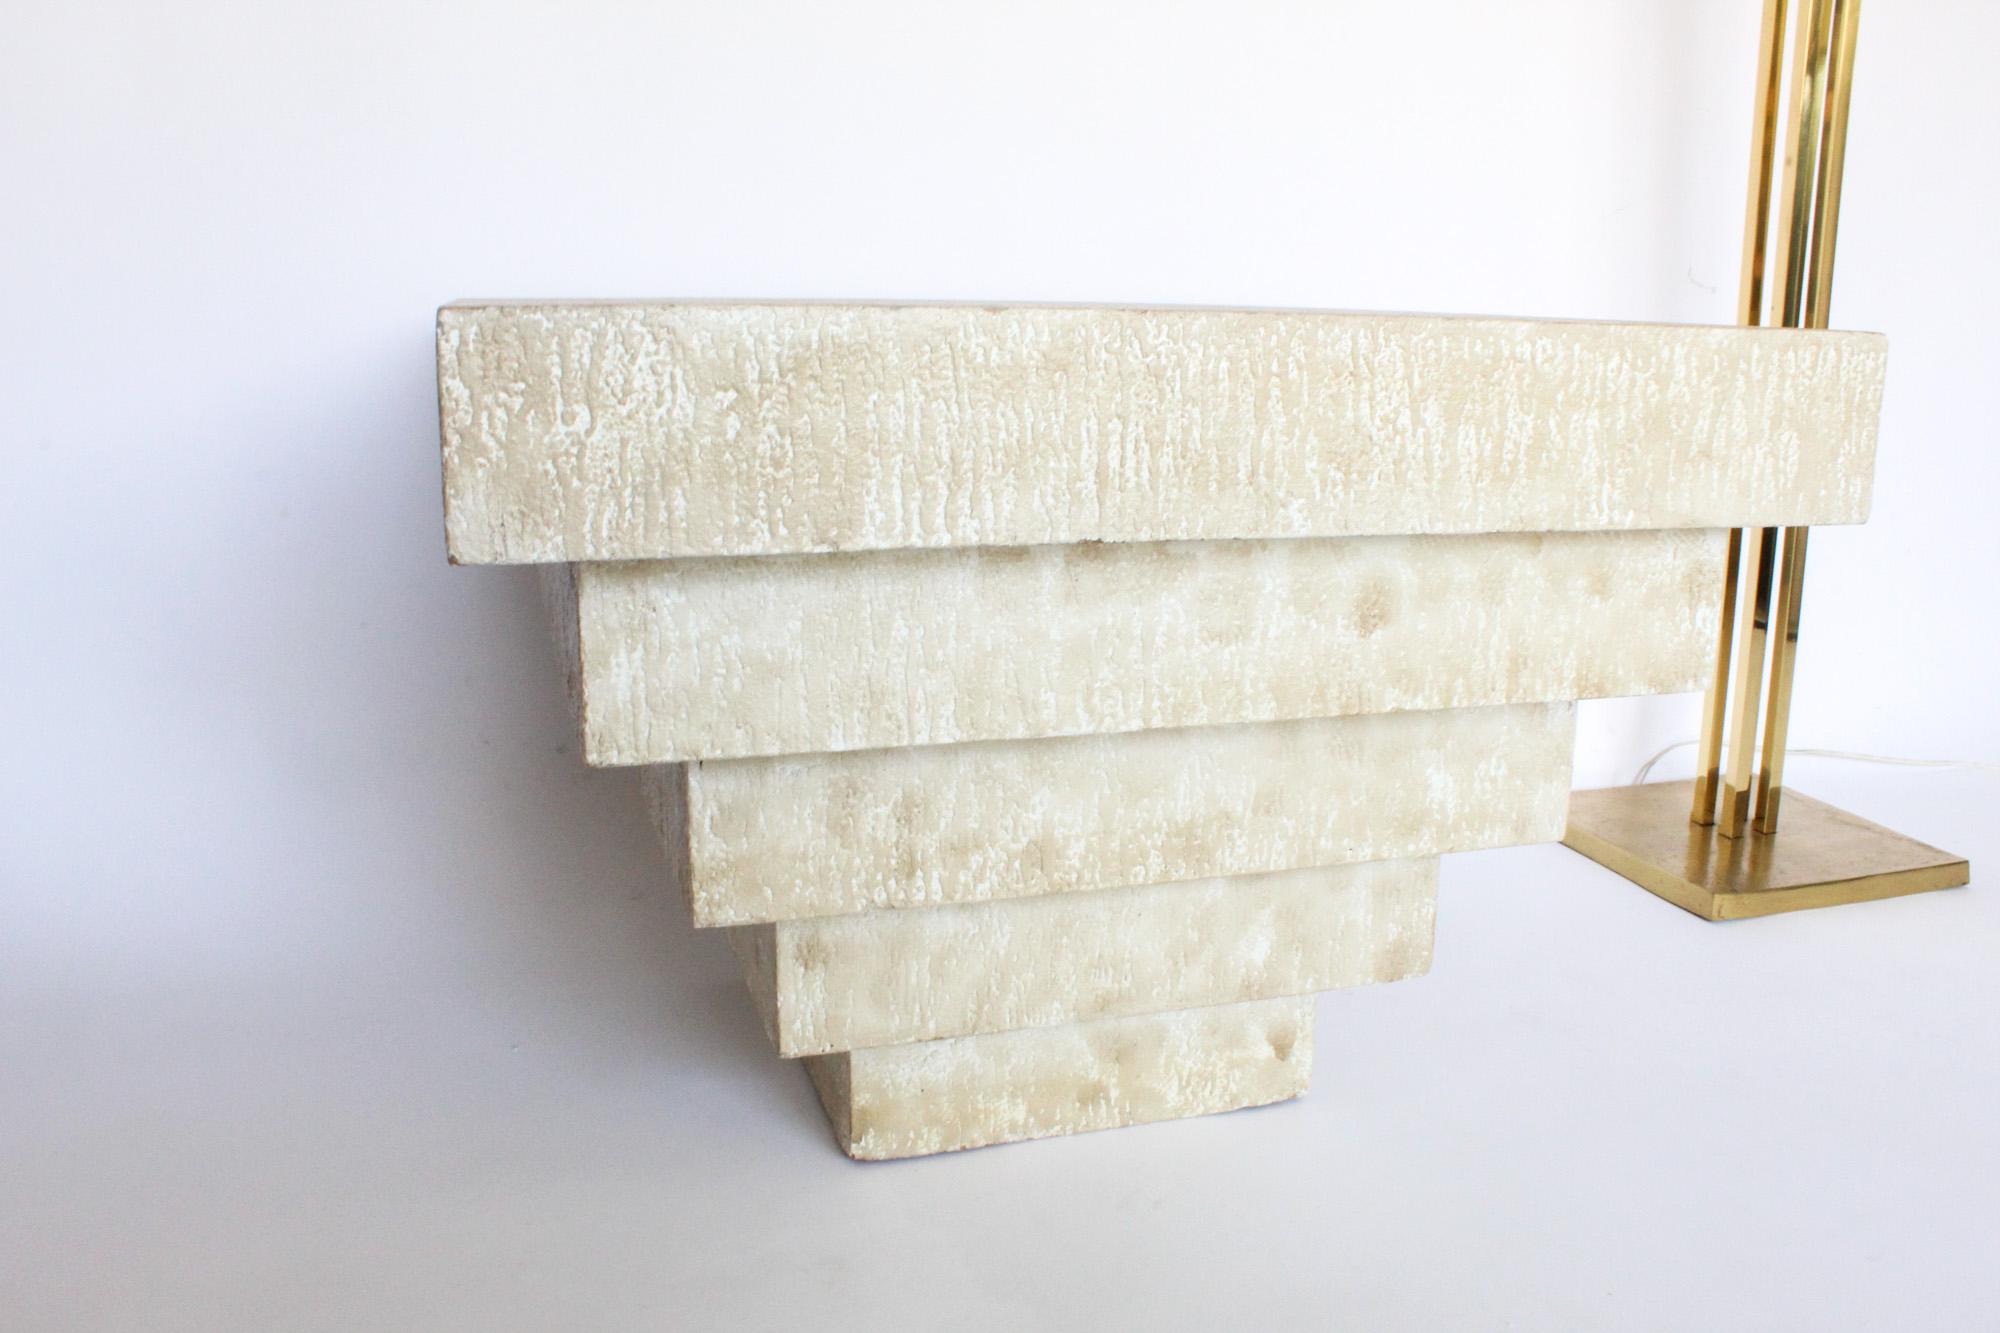 Excellent example of 1980s Postmodern design, beautiful geometric stacked occasional table that can function as side table, end table or coffee table. Table has a Postmodern design but also an organic element which is the textured plaster finish and